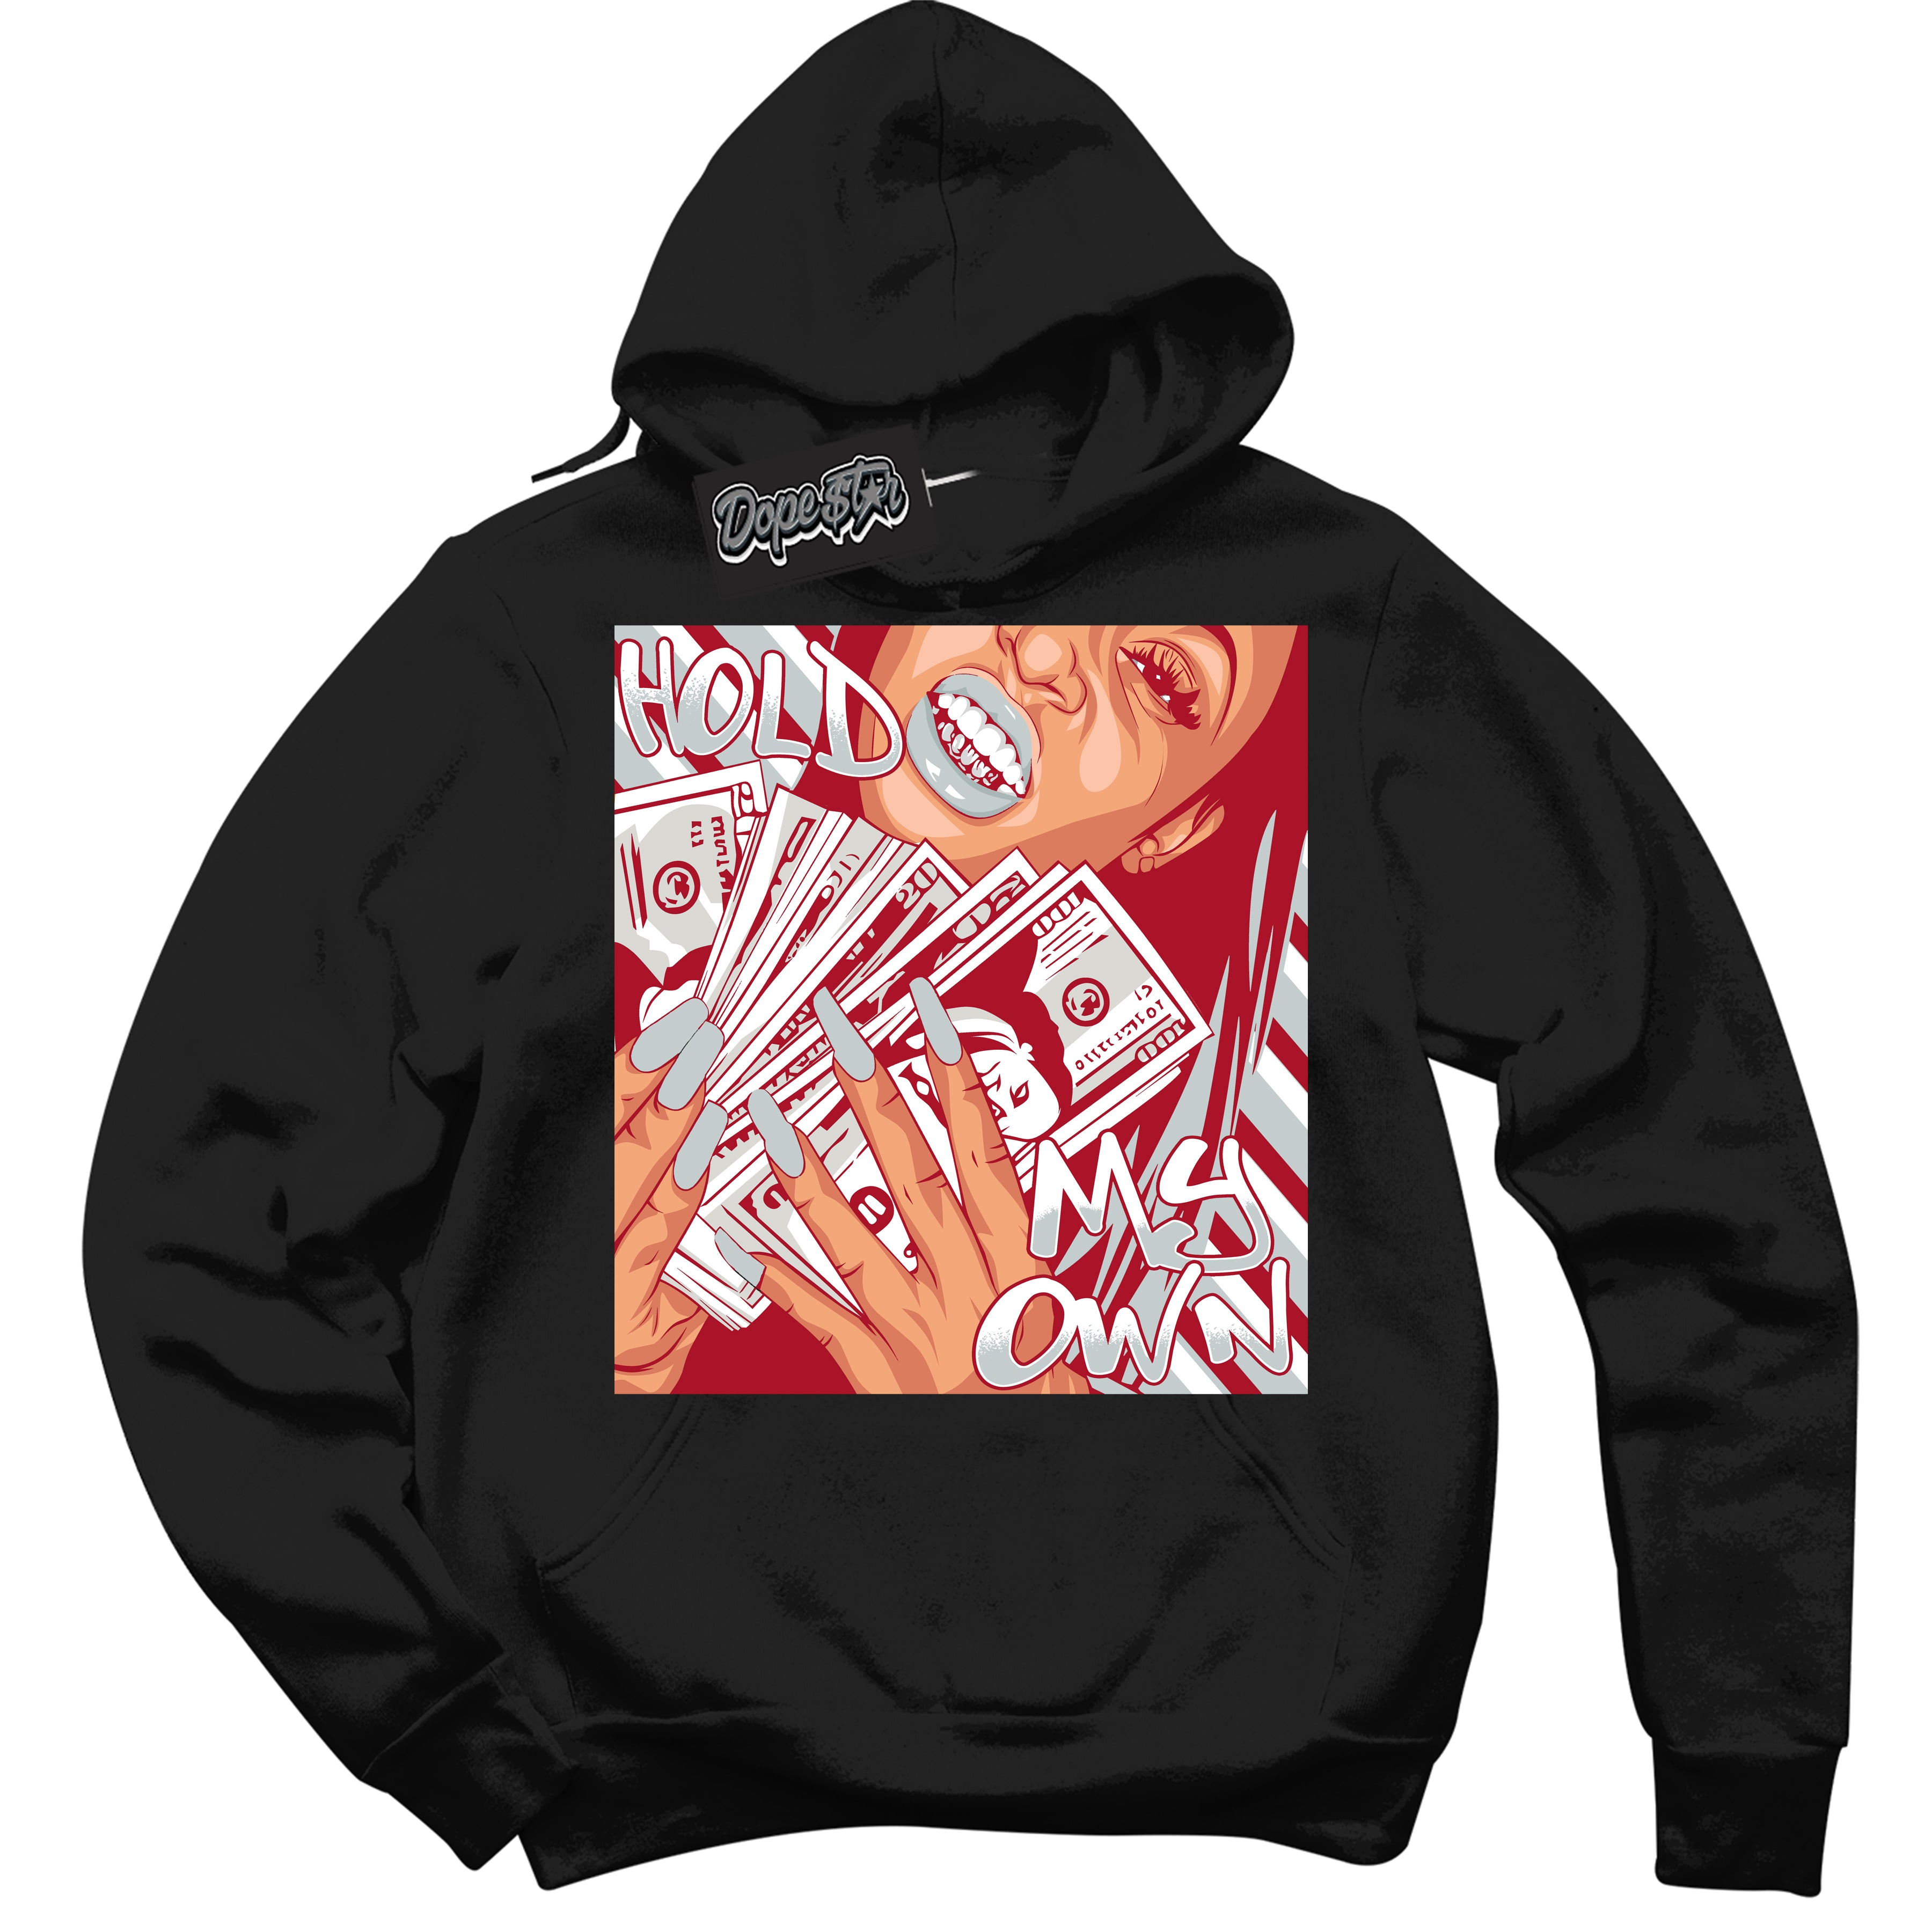 Cool Black Hoodie with “ Hold My Own ”  design that Perfectly Matches  Reverse Ultraman Sneakers.